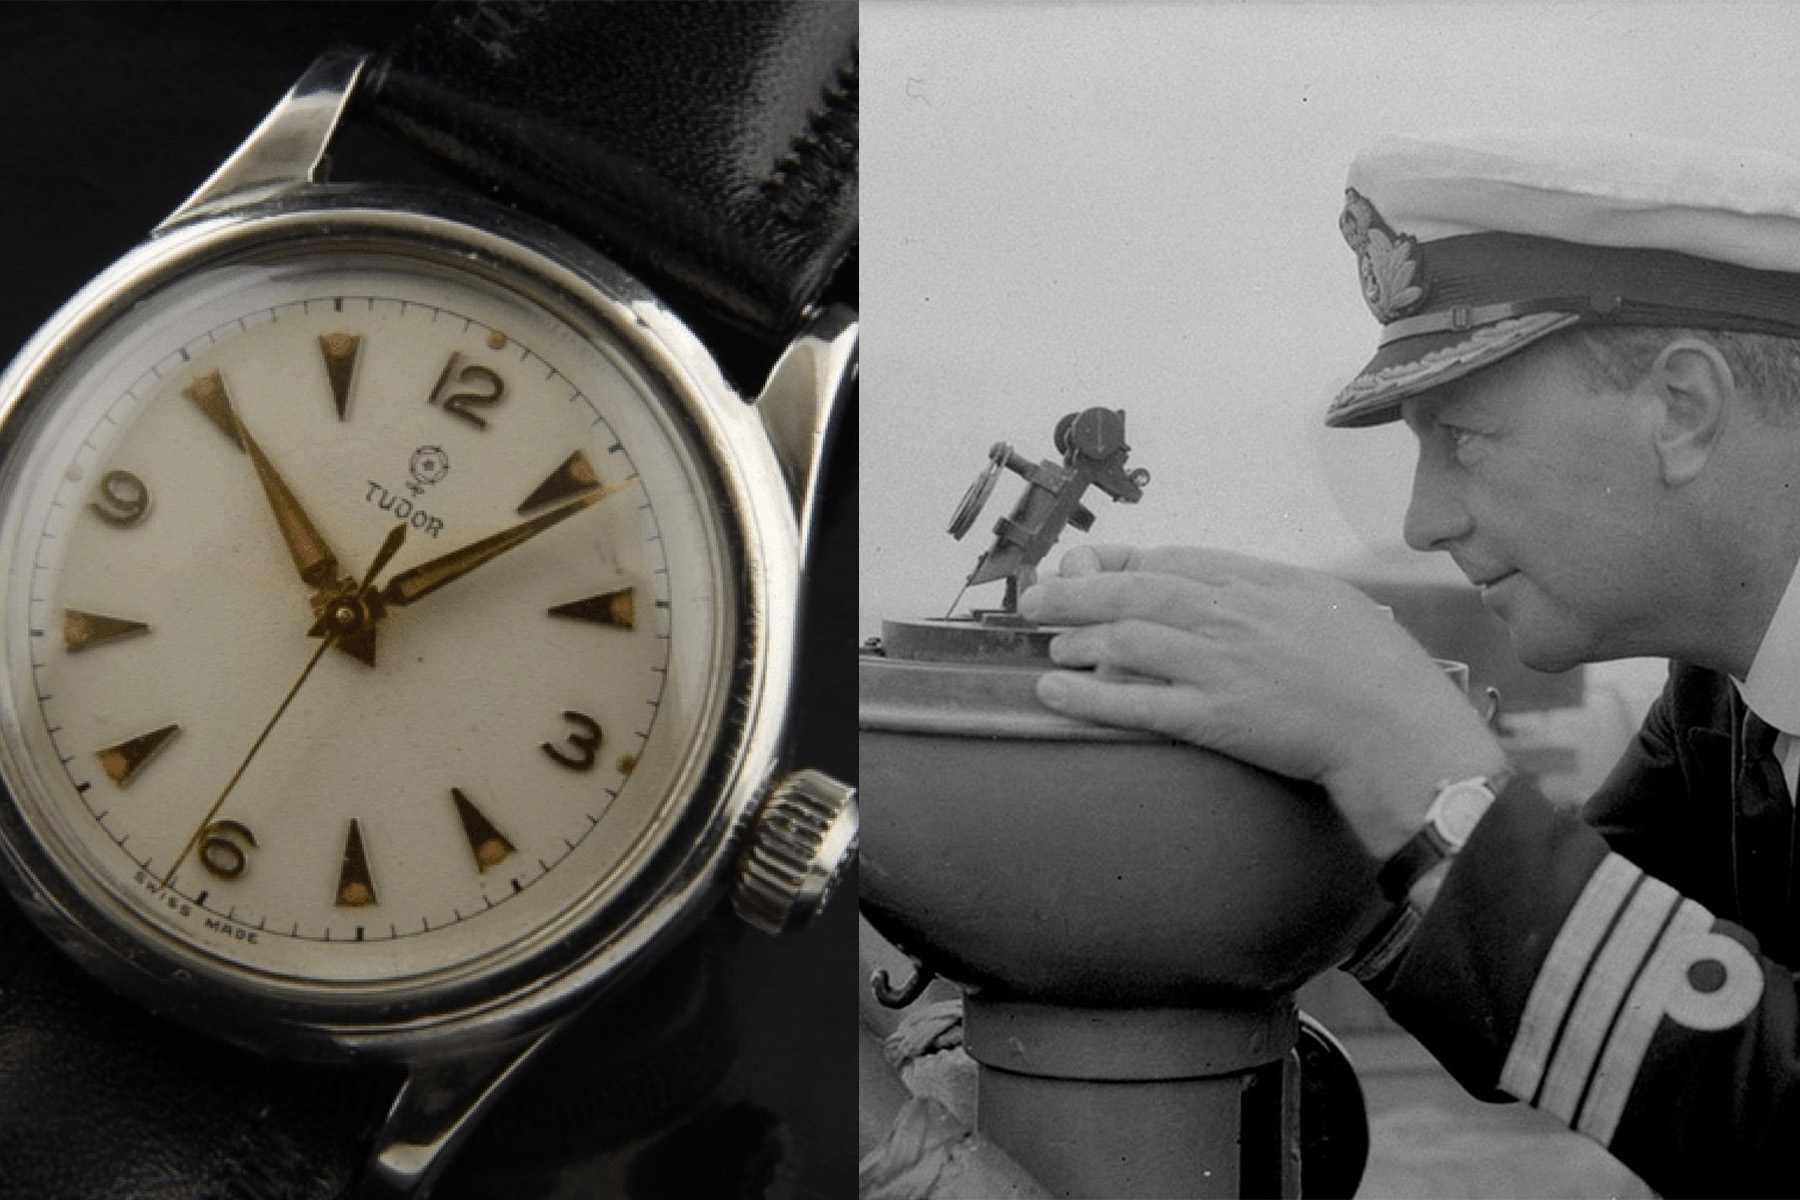 The Early Rolex And Tudor Oyster Watches That Saw Action In WWII During The Battle Of The Atlantic